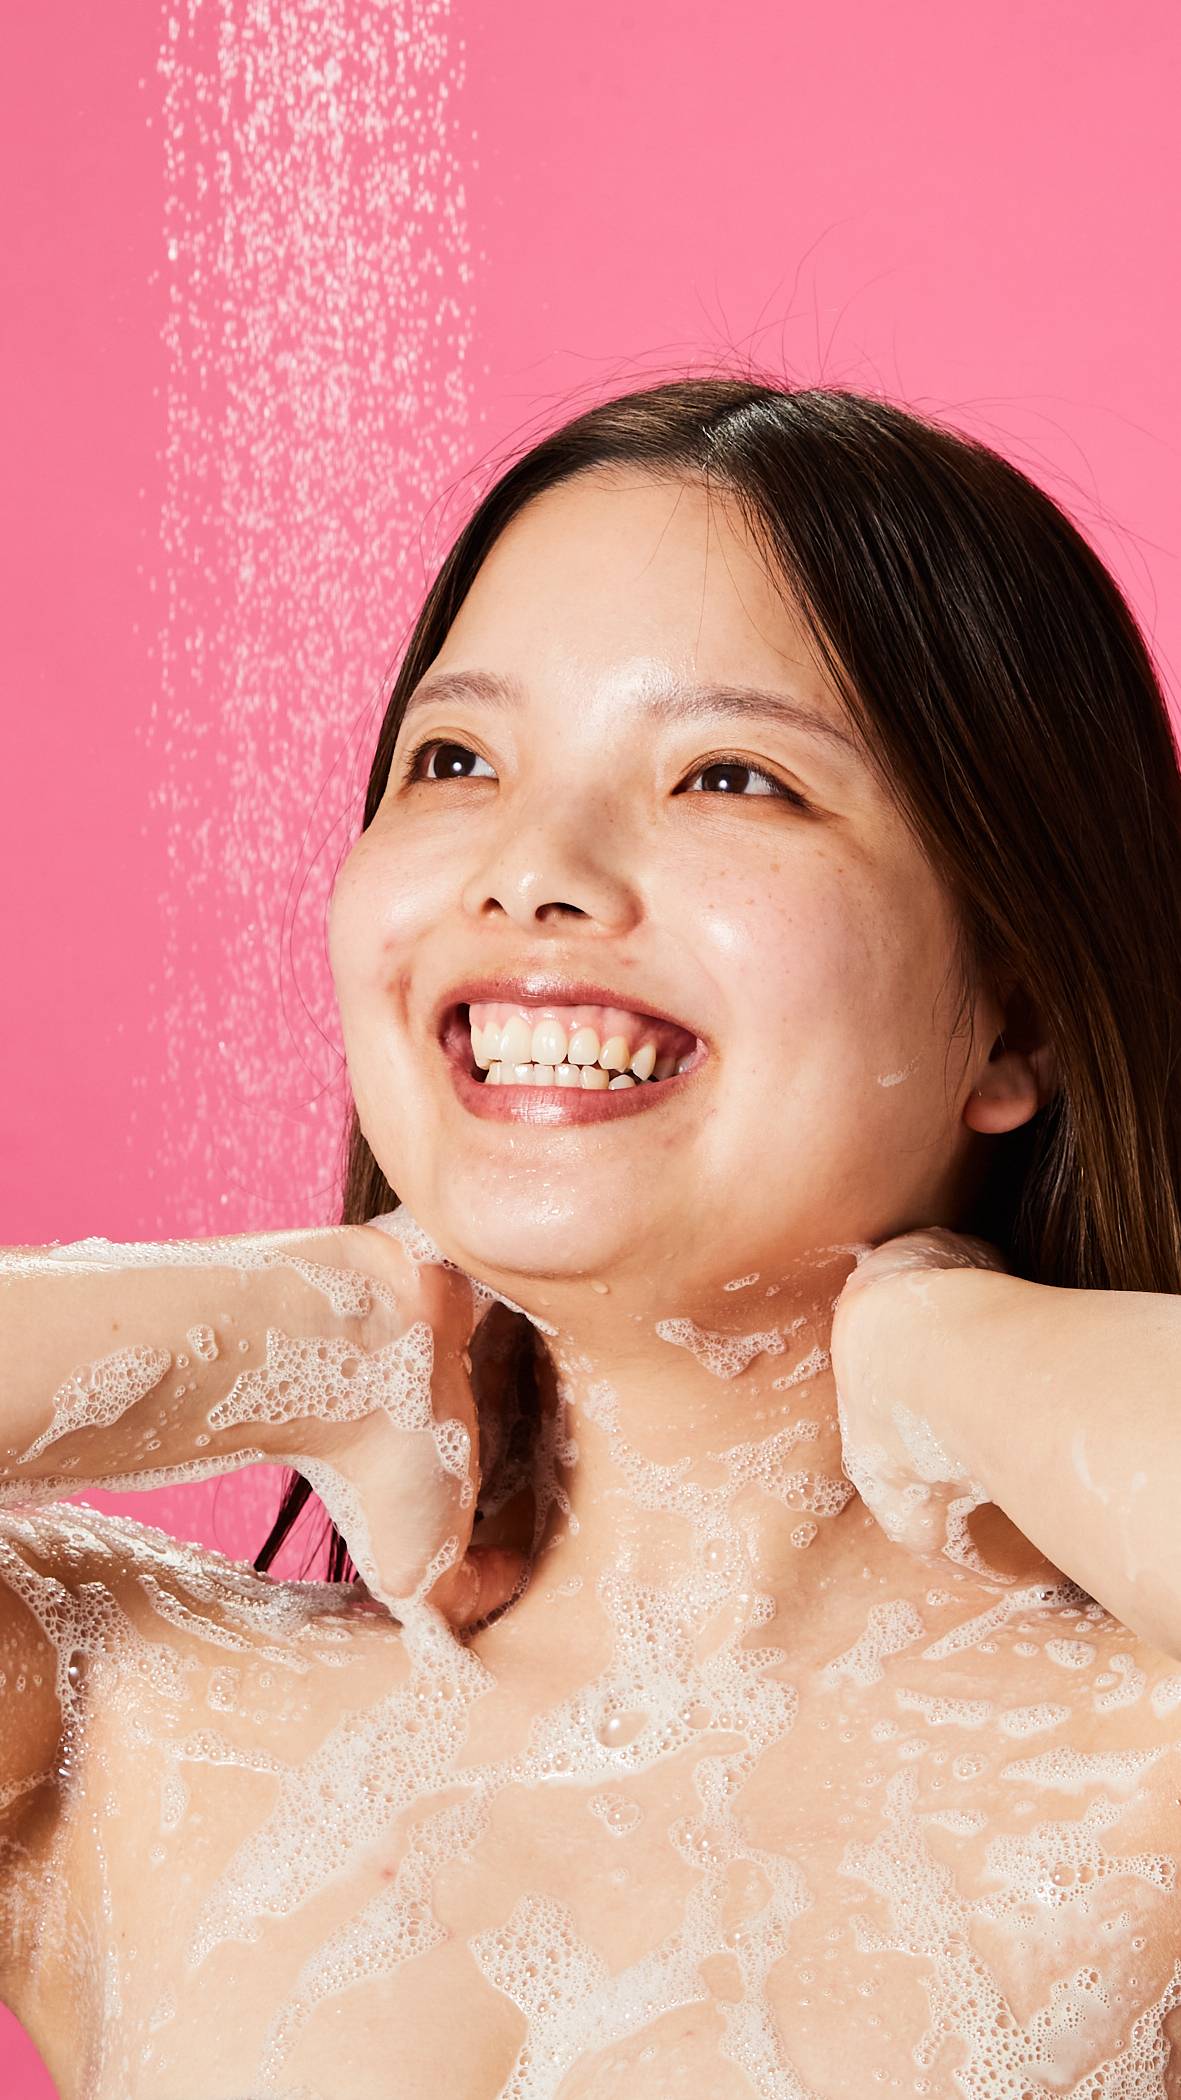 The model is standing under running shower water on a vibrant, pink background as they lather up their neck and chest with the Sakura shower gel. 